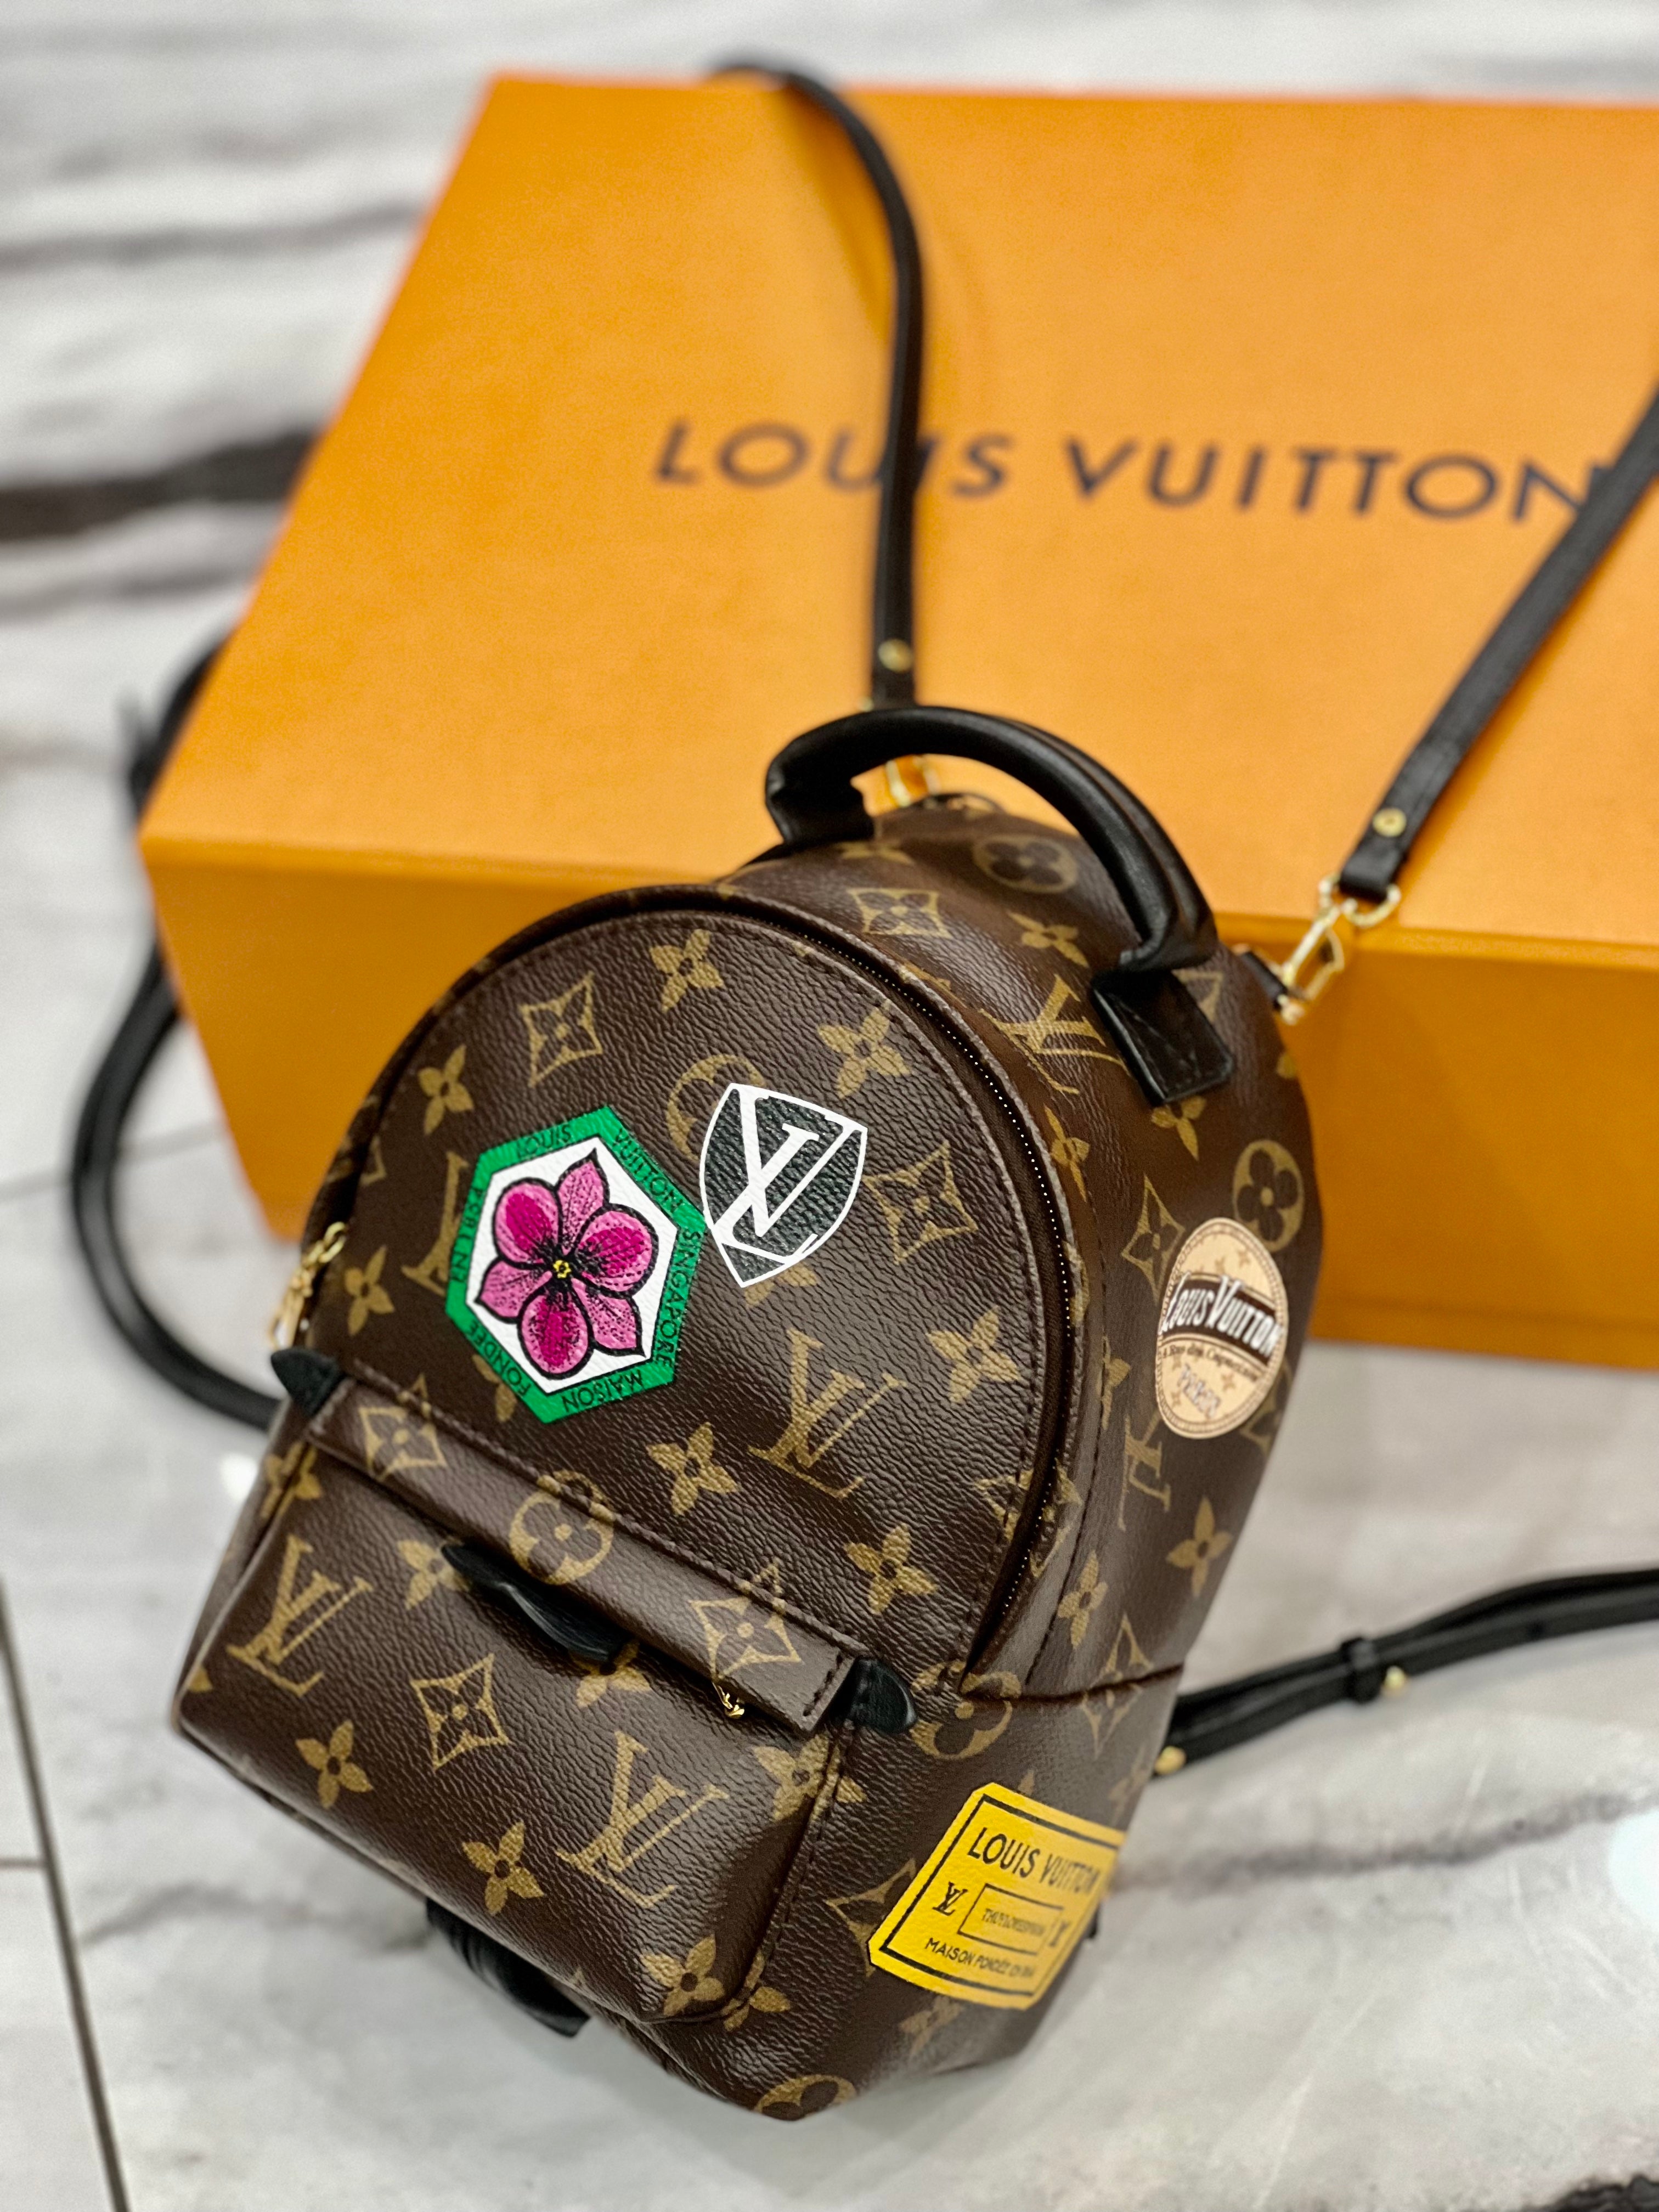 louis vuitton backpack palm springs